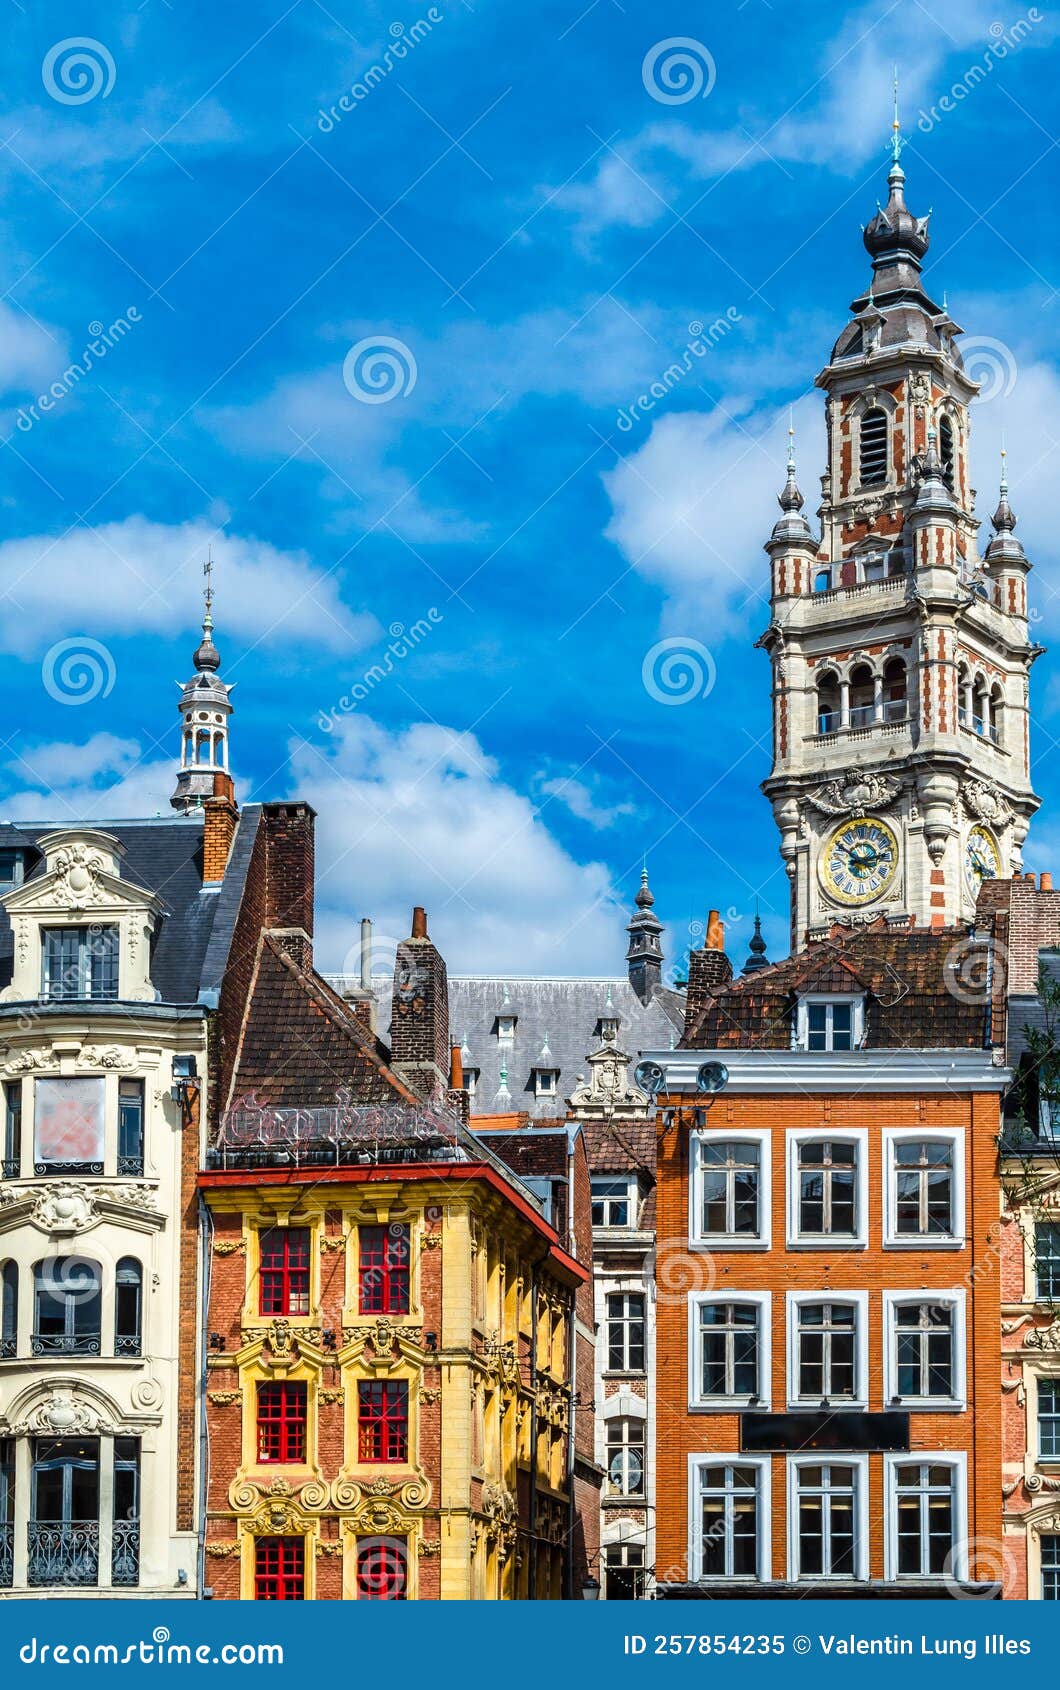 Architecture in Lille, France Stock Image - Image of city, place: 257854235